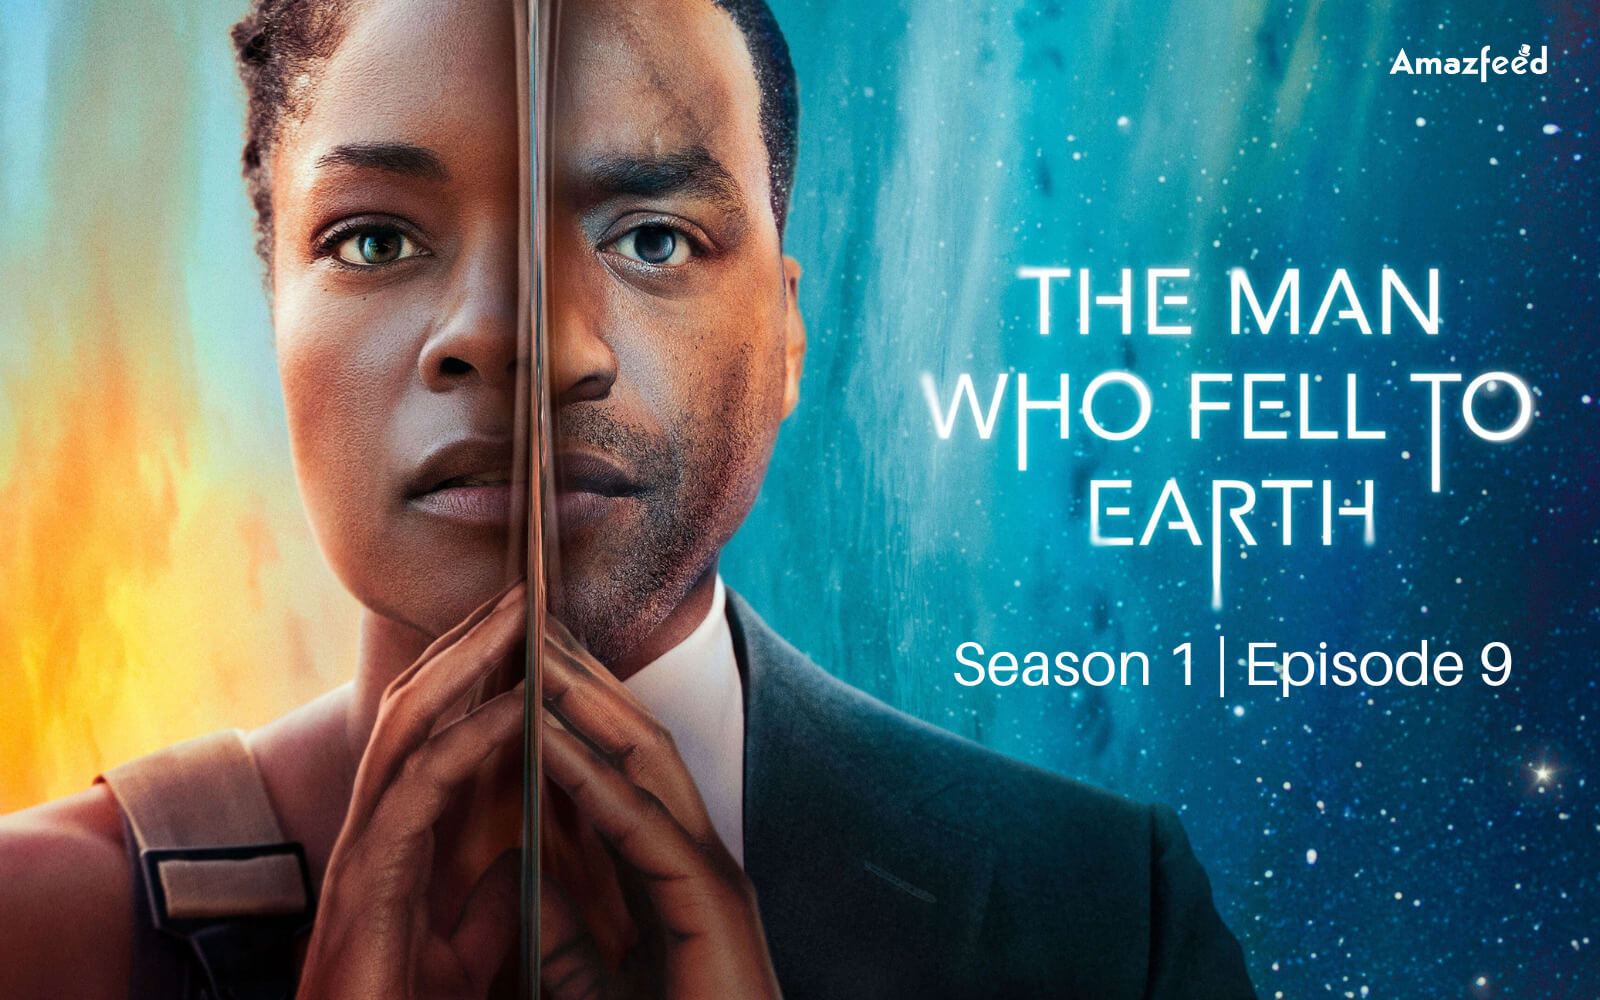 The Man Who Fell to Earth Season 1 Episode 9 Release date